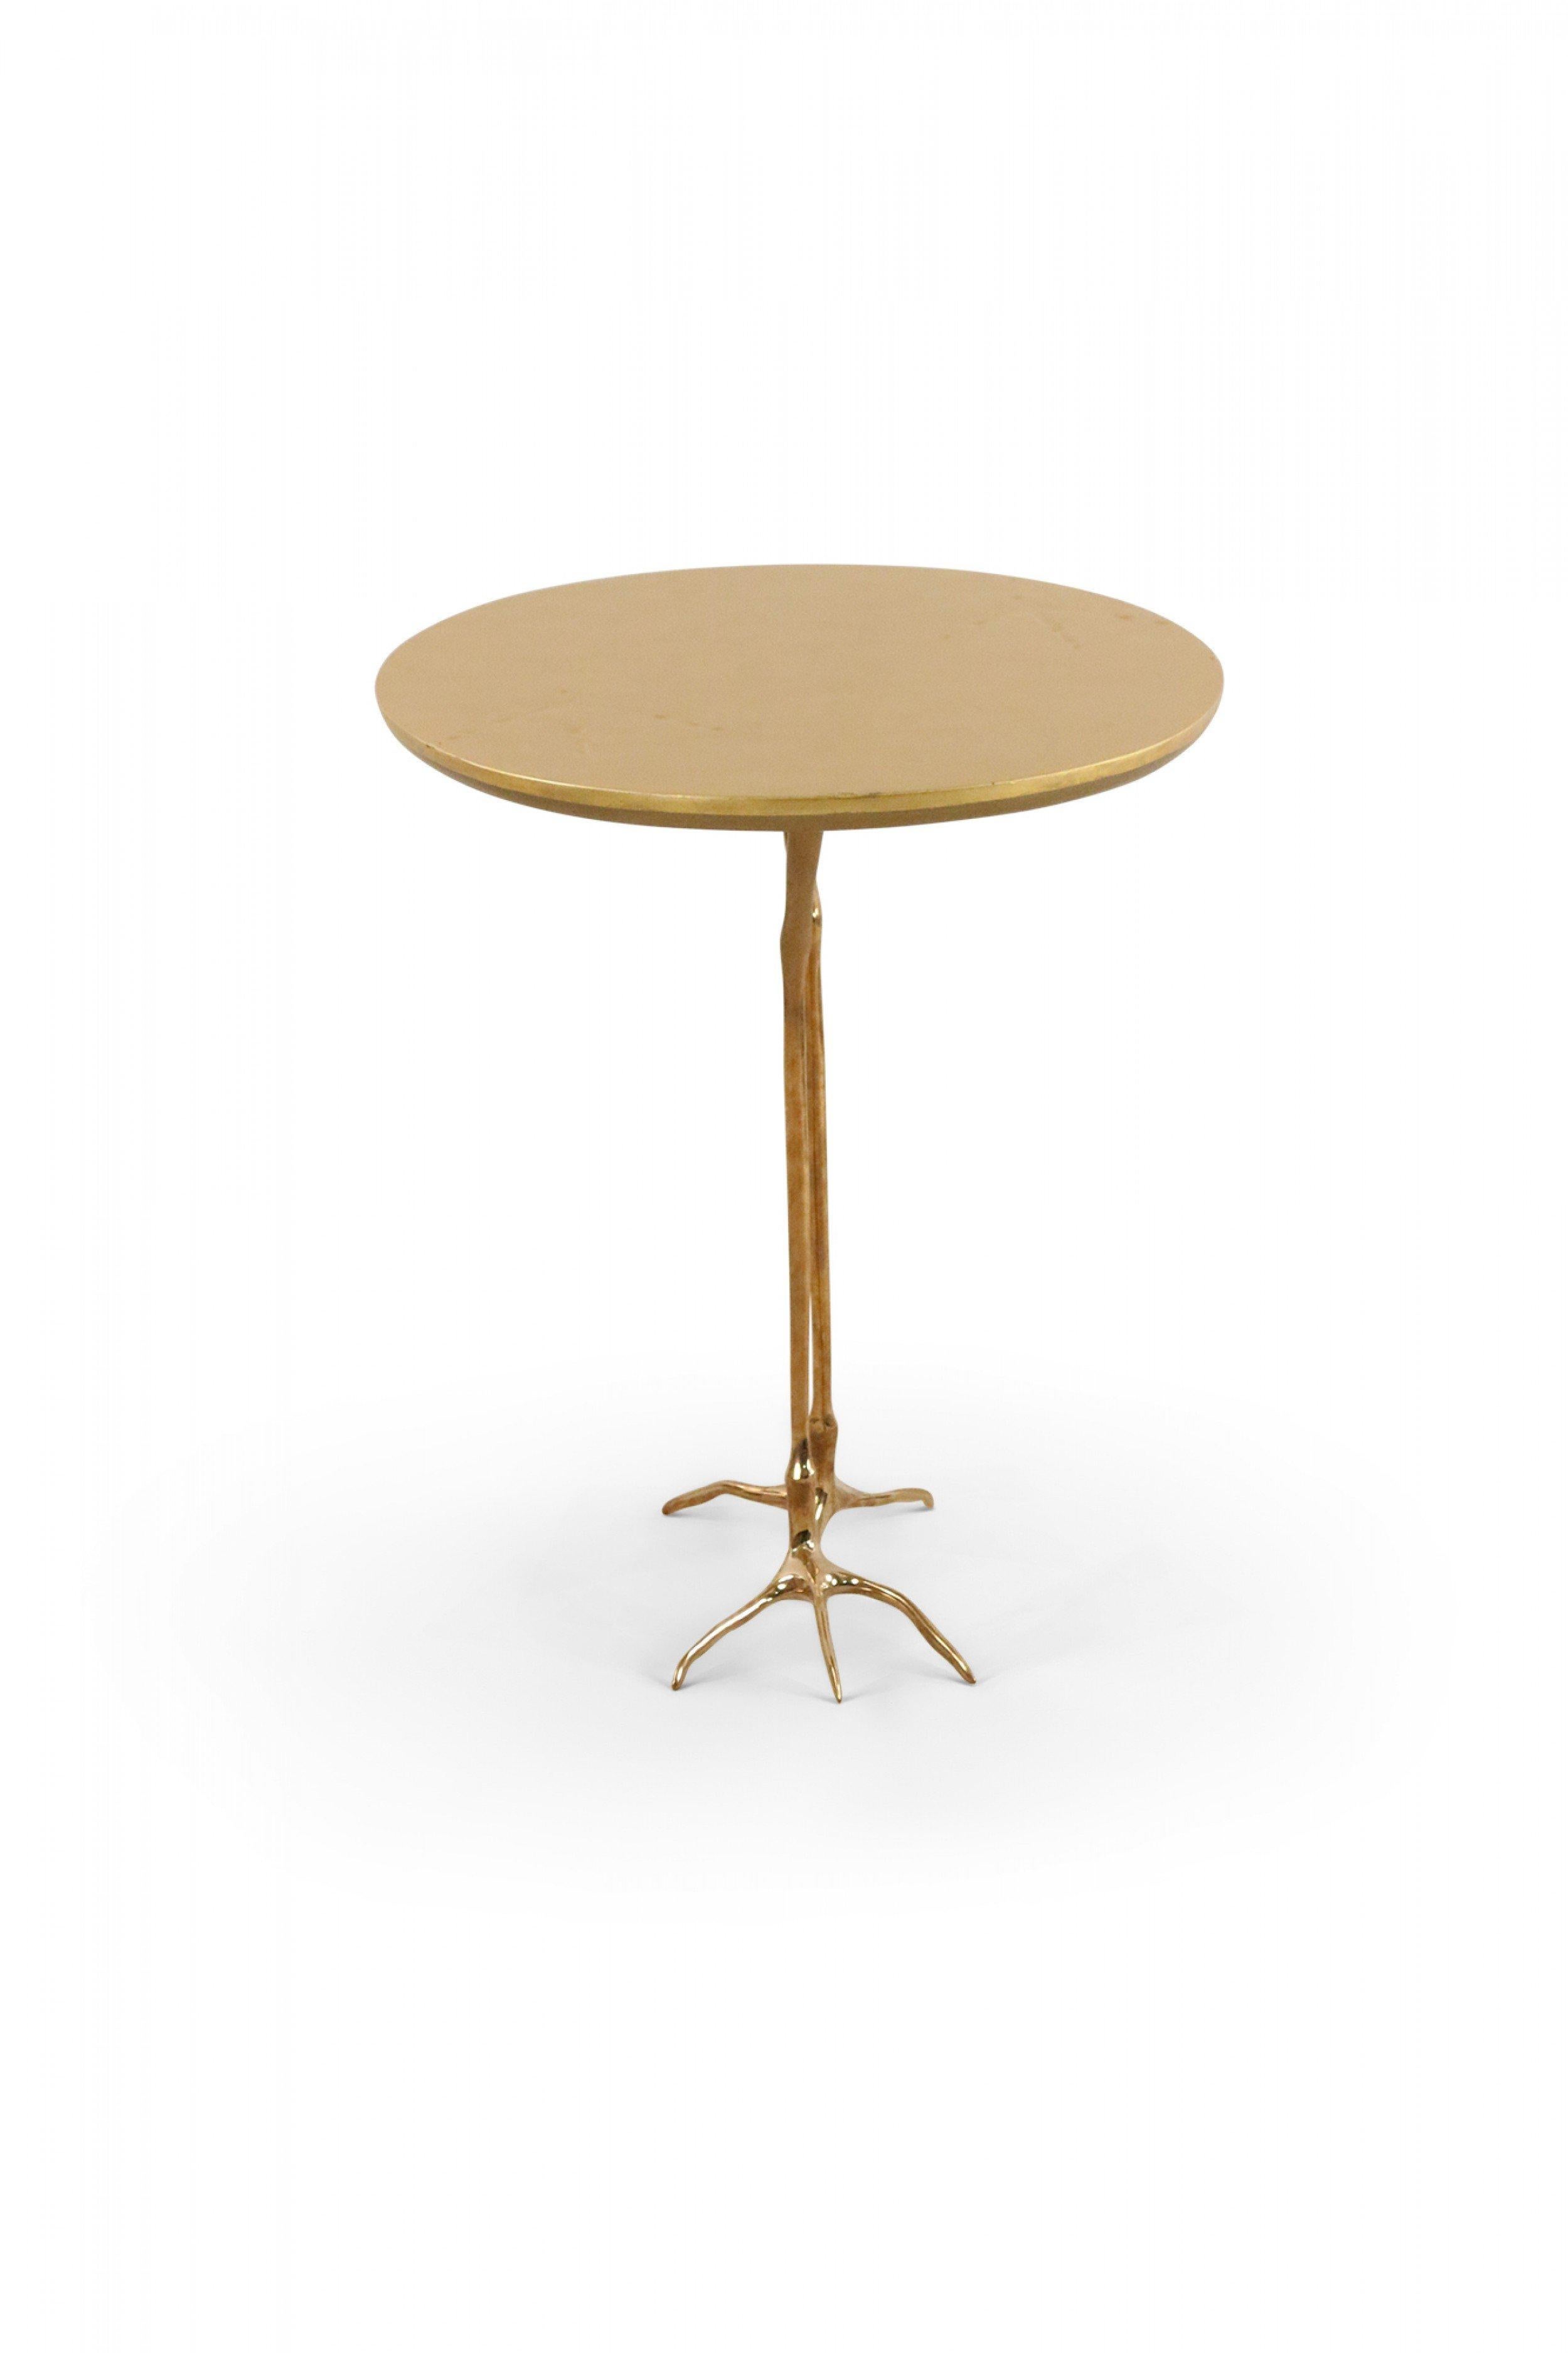 Meret Oppenheim Mid-Century Gilt Metal Bird Foot End Table For Sale 2